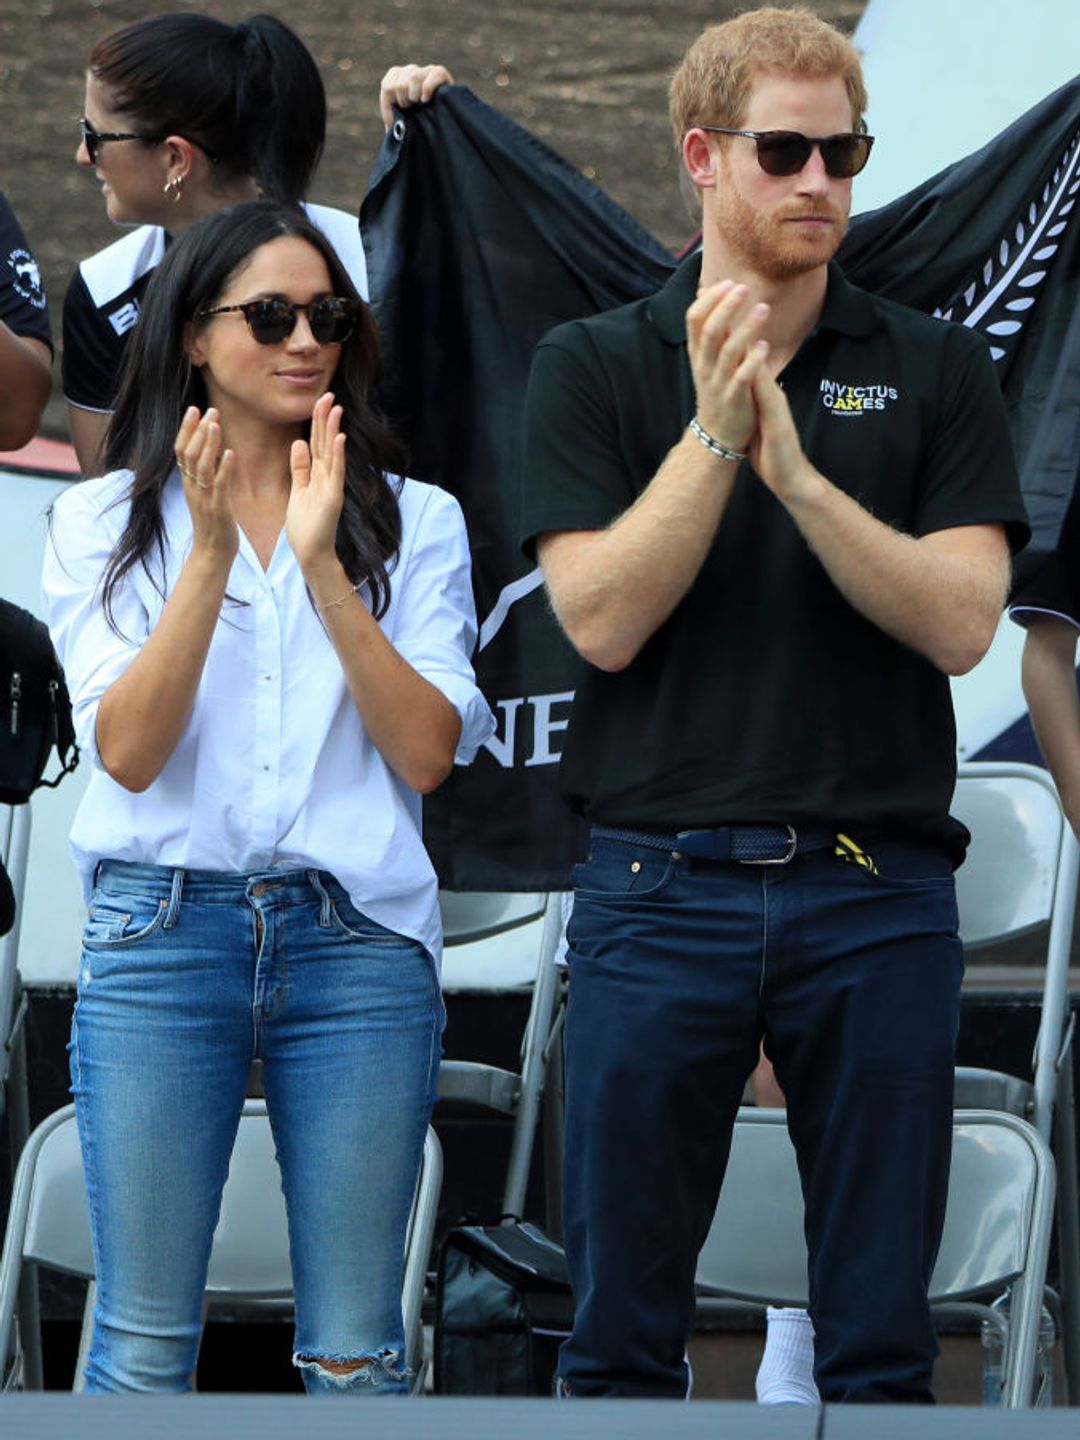 Meghan Markle in a classic shirt and jeans combo with Prince Harry